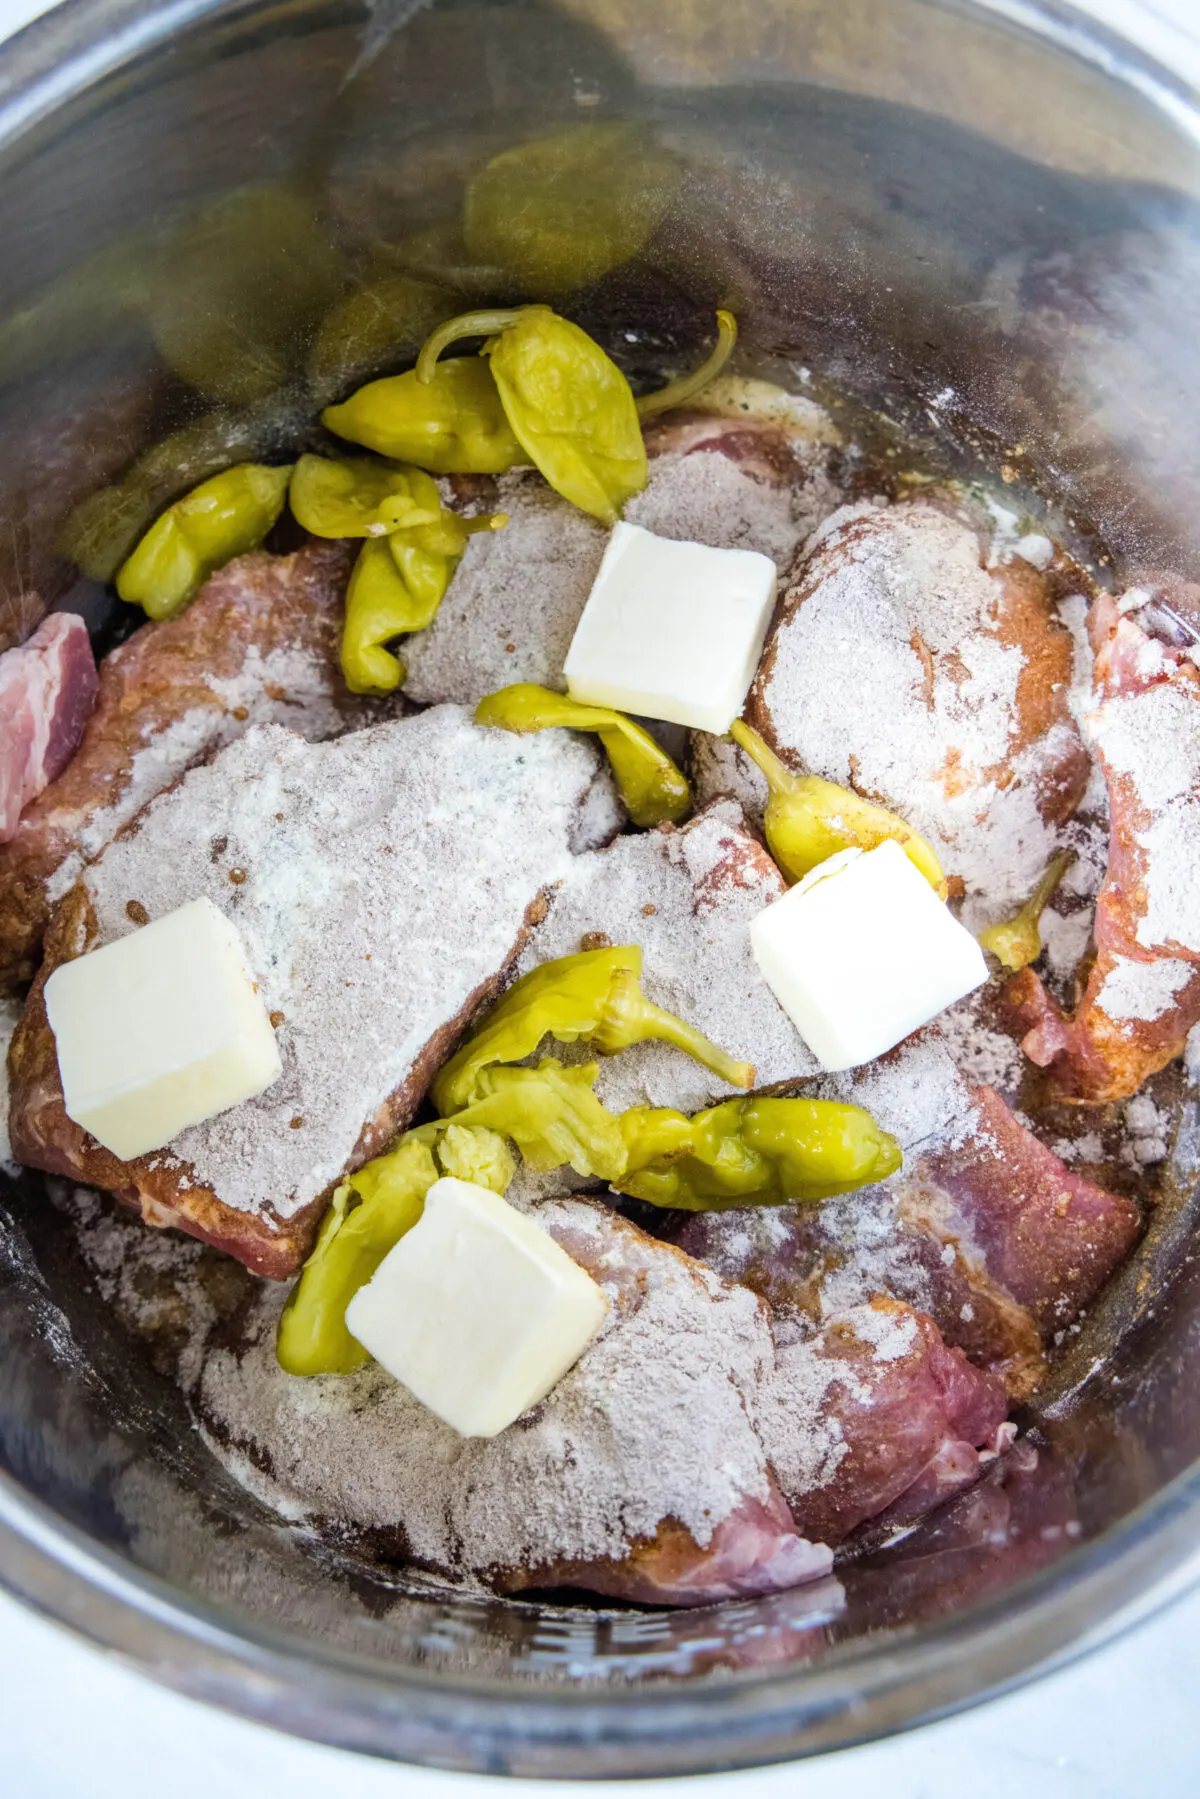 Raw pork in an Instant pot covered with seasoning, pepperoncini peppers, and pieces of butter